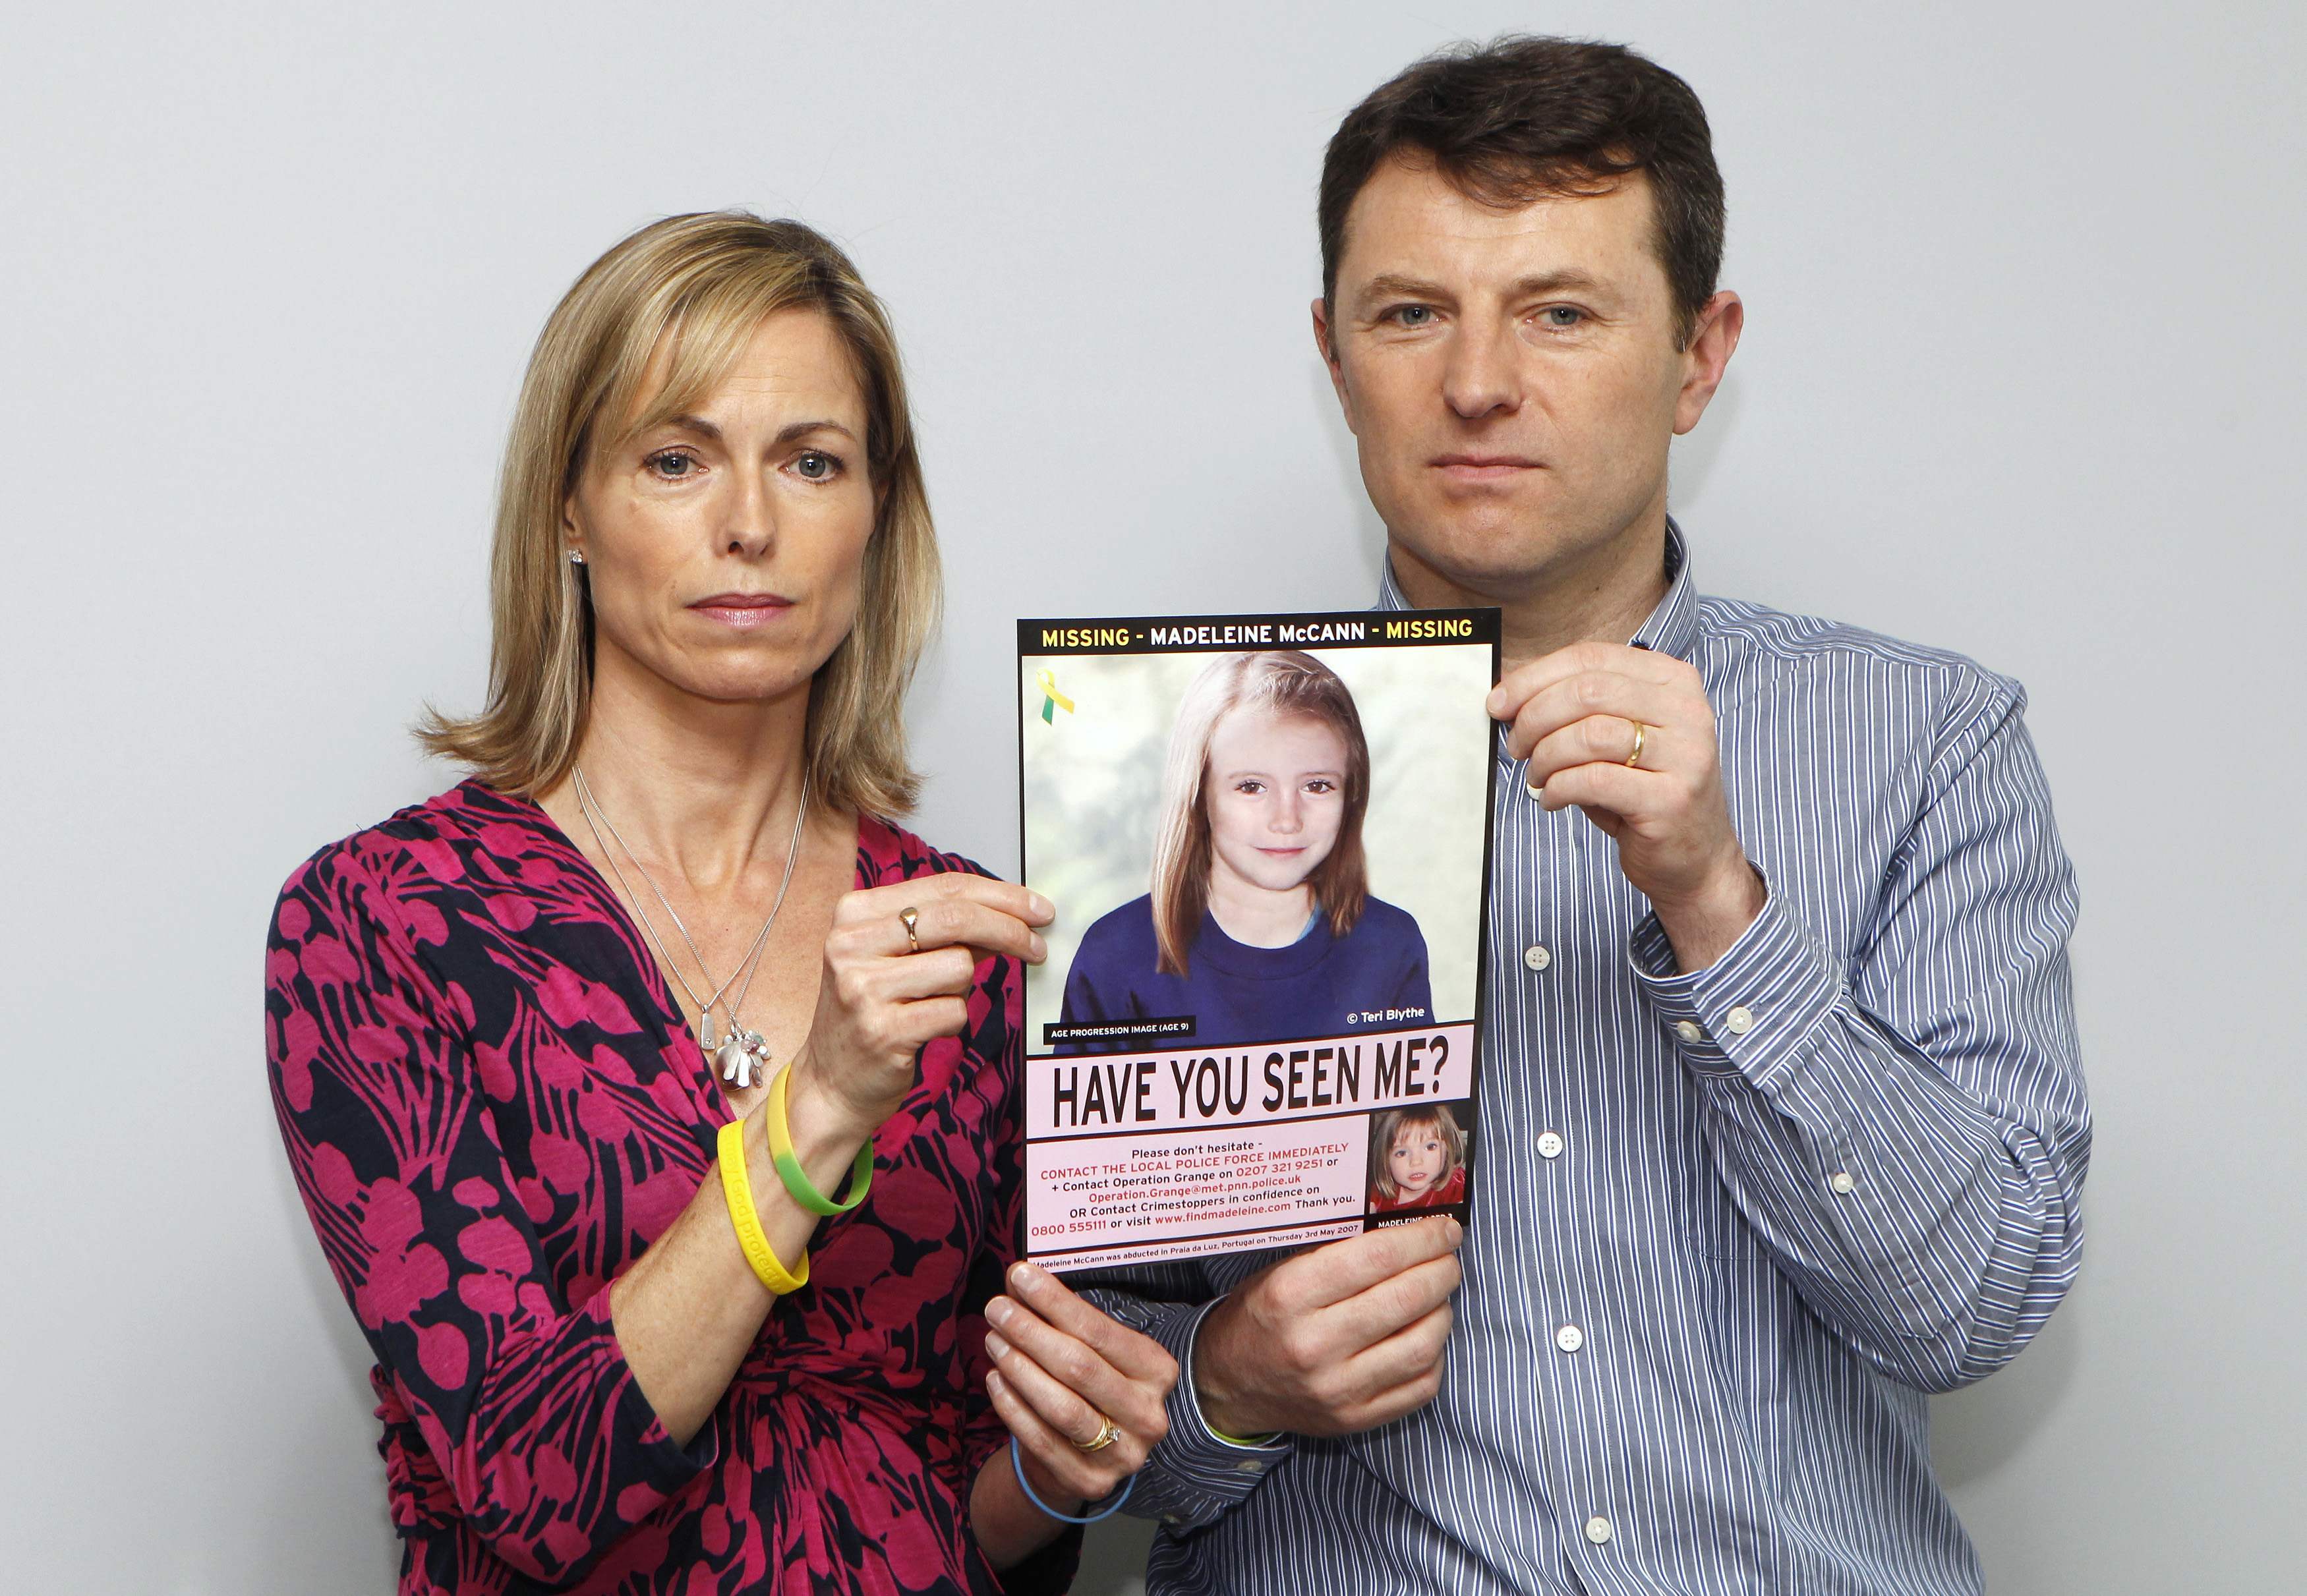 Kate and Gerry McCann are seen posing with a computer generated image of how their missing daughter Madeleine might look. Photo: Reuters